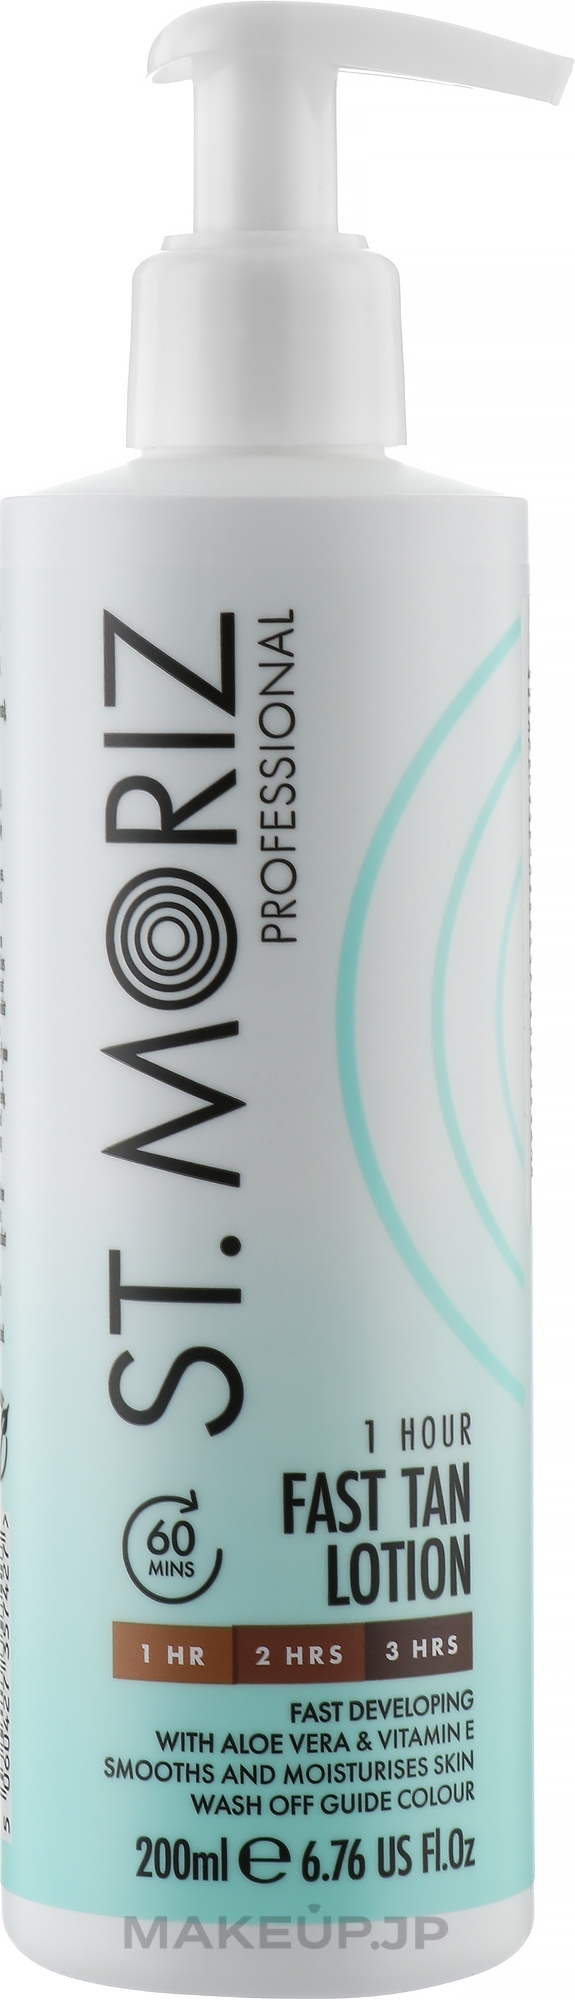 Self-tanning Lotion - St. Moriz Professional 1 Hour Fast Self Tanning Lotion — photo 200 ml